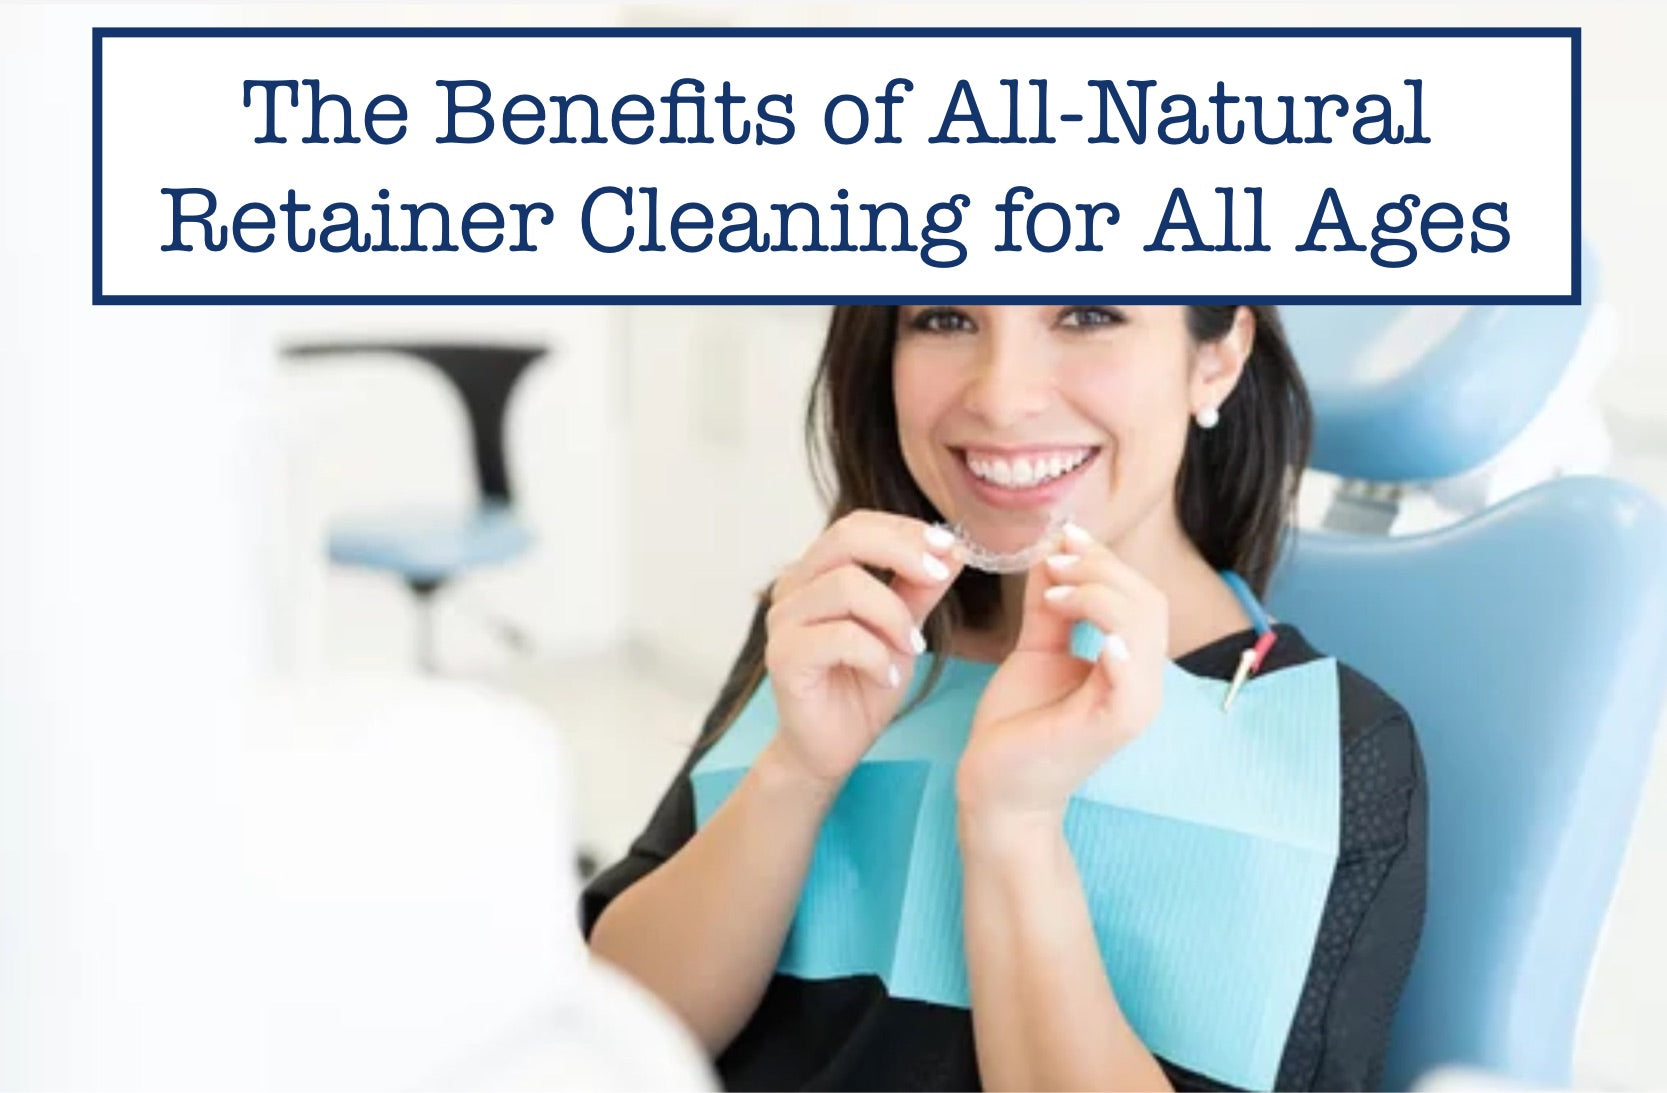 The Benefits of All-Natural Retainer Cleaning for All Ages